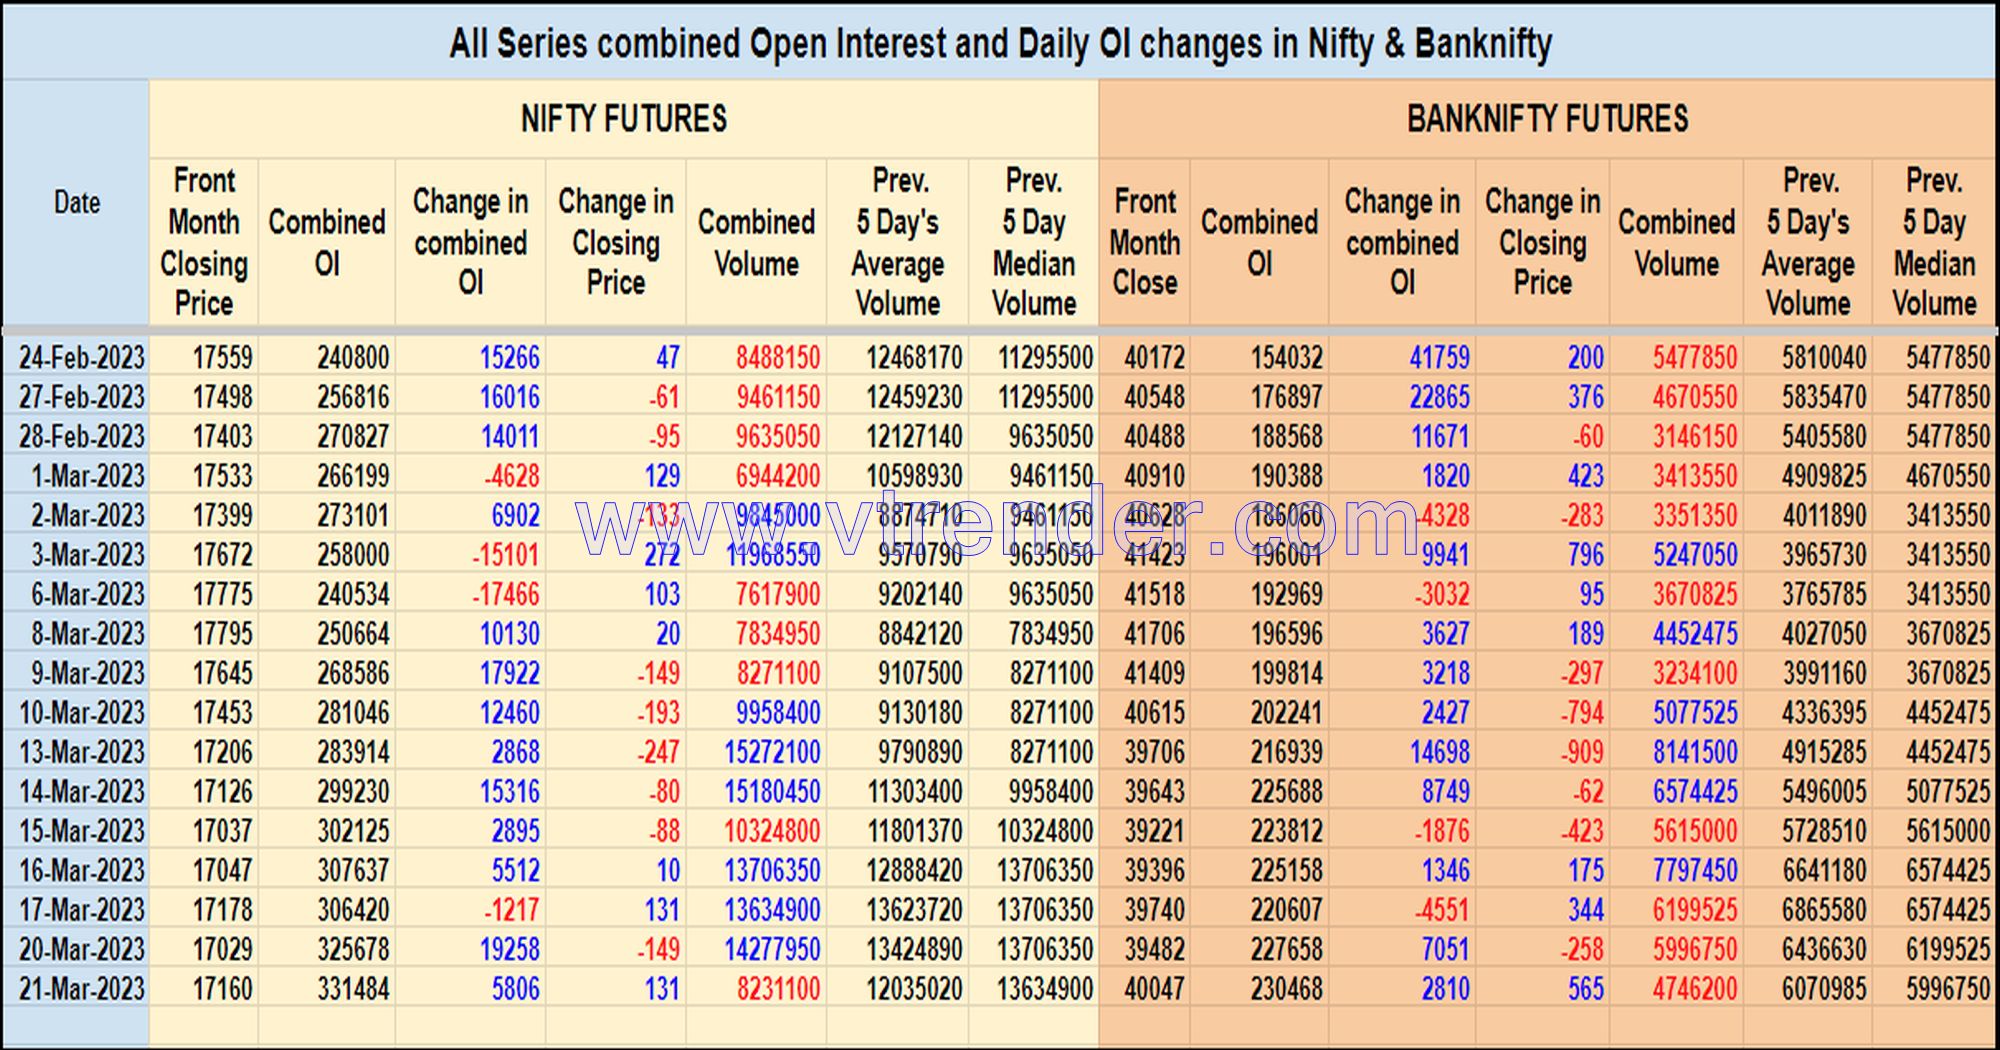 Oi21Mar Nifty And Banknifty Futures With All Series Combined Open Interest – 21St Mar 2023 Banknifty, Nifty, Open Interest